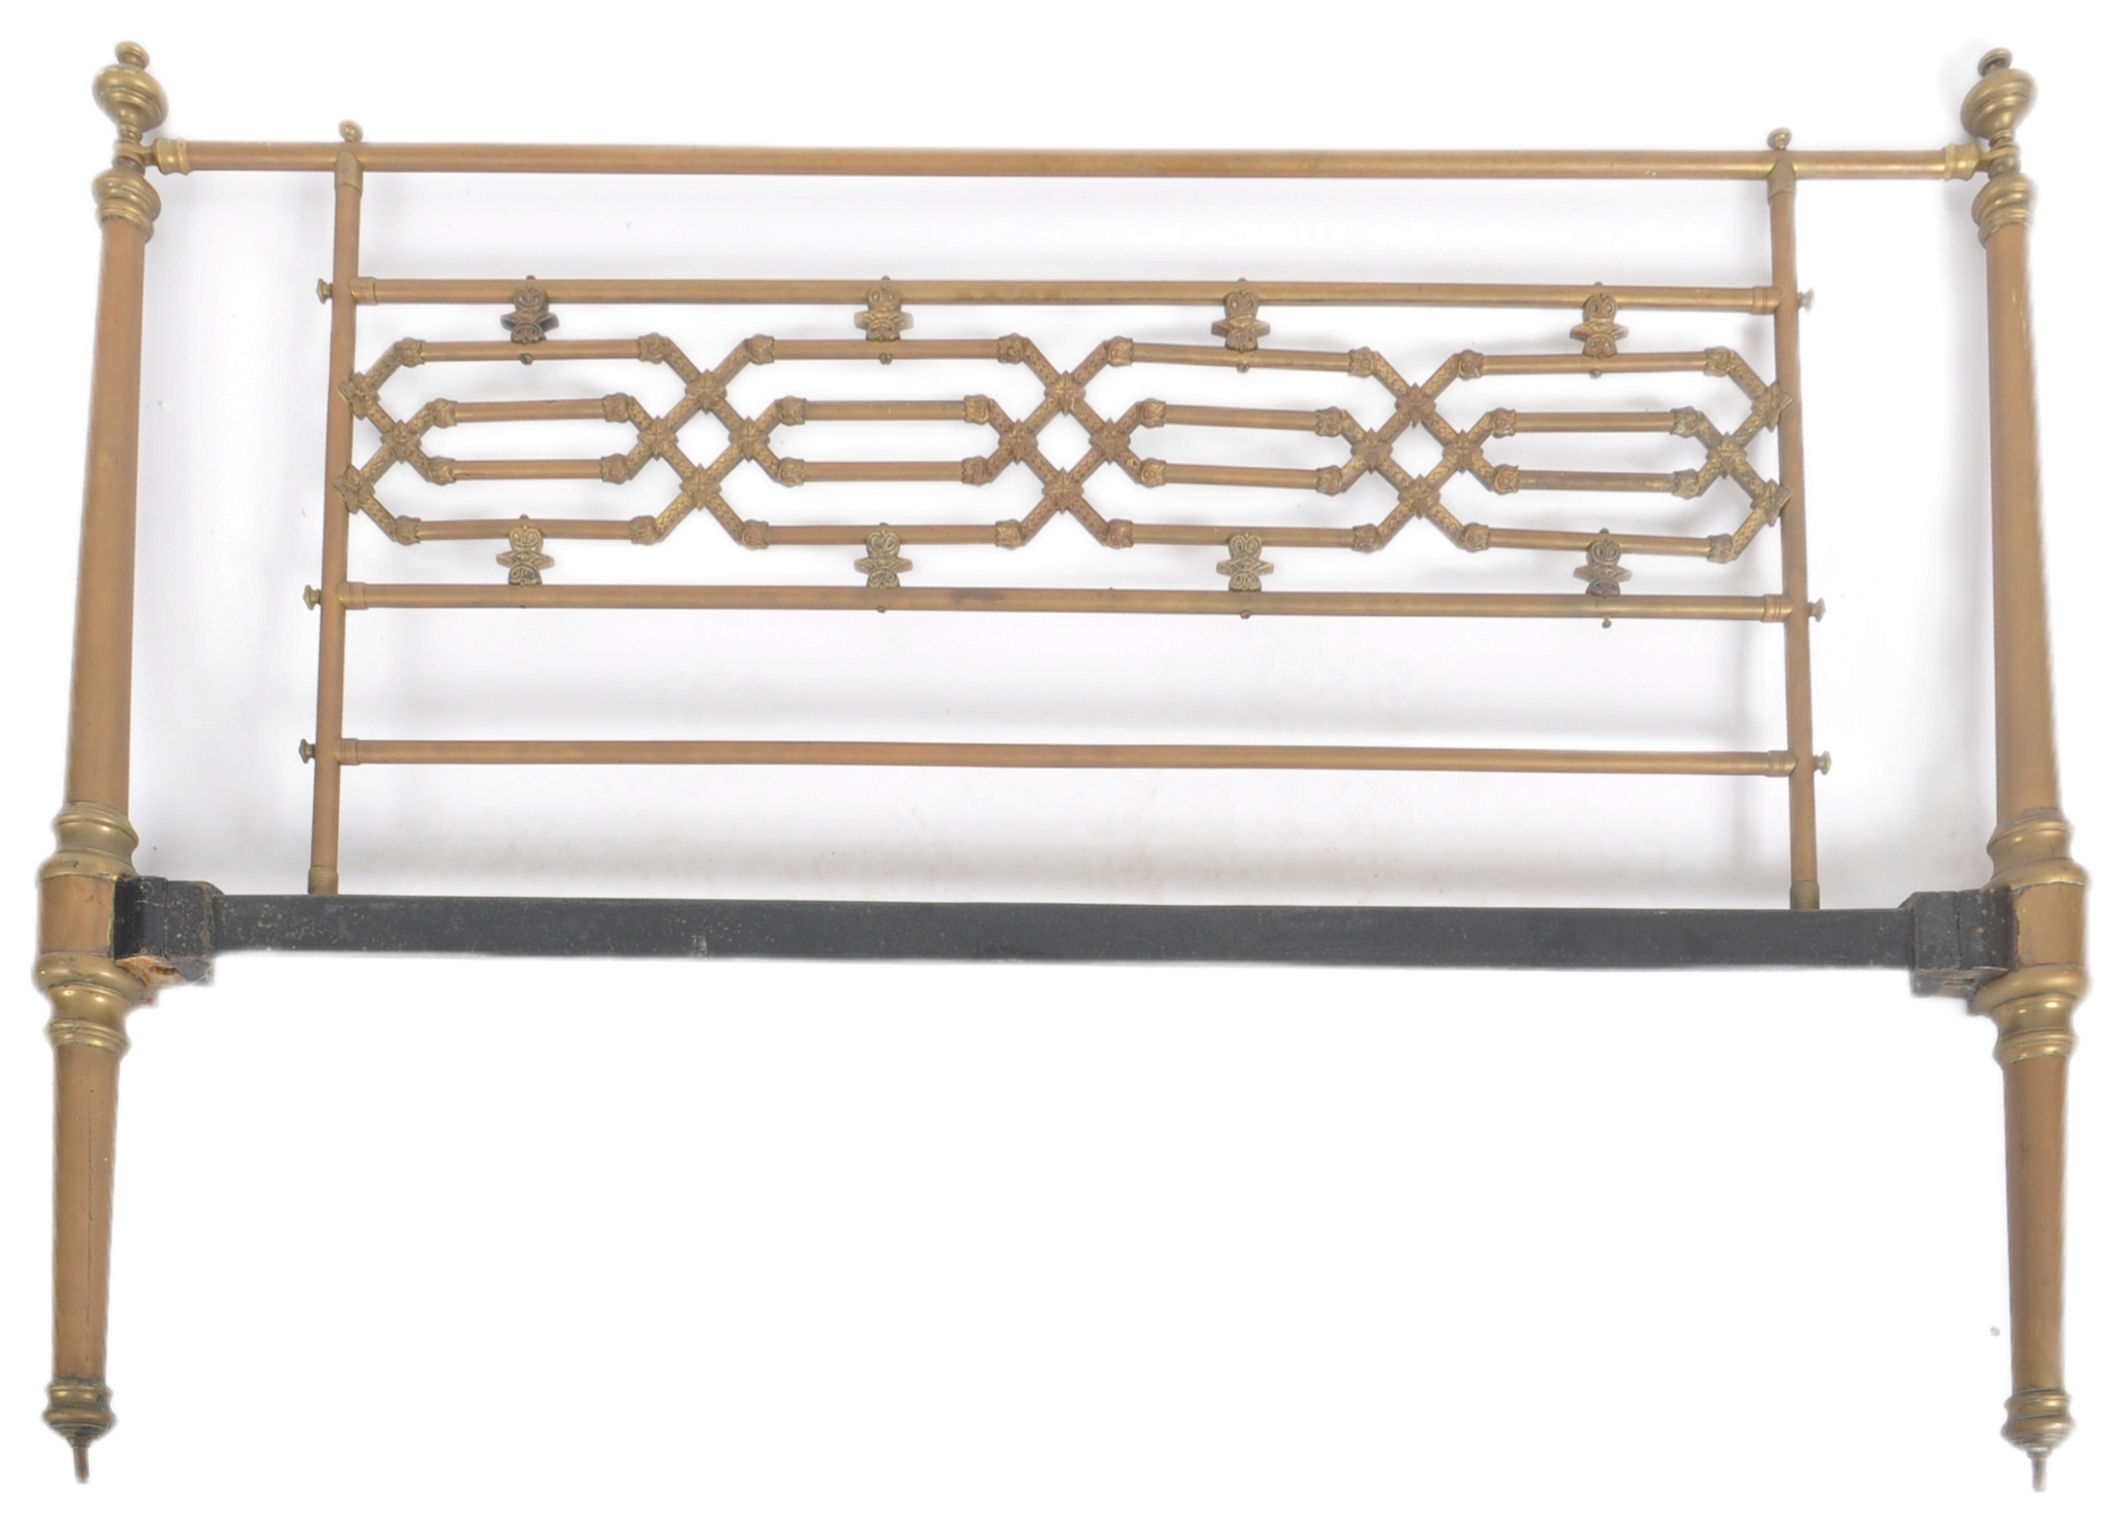 19TH CENTURY VICTORIAN ARCHITECTURAL BRASS BED - Image 8 of 9